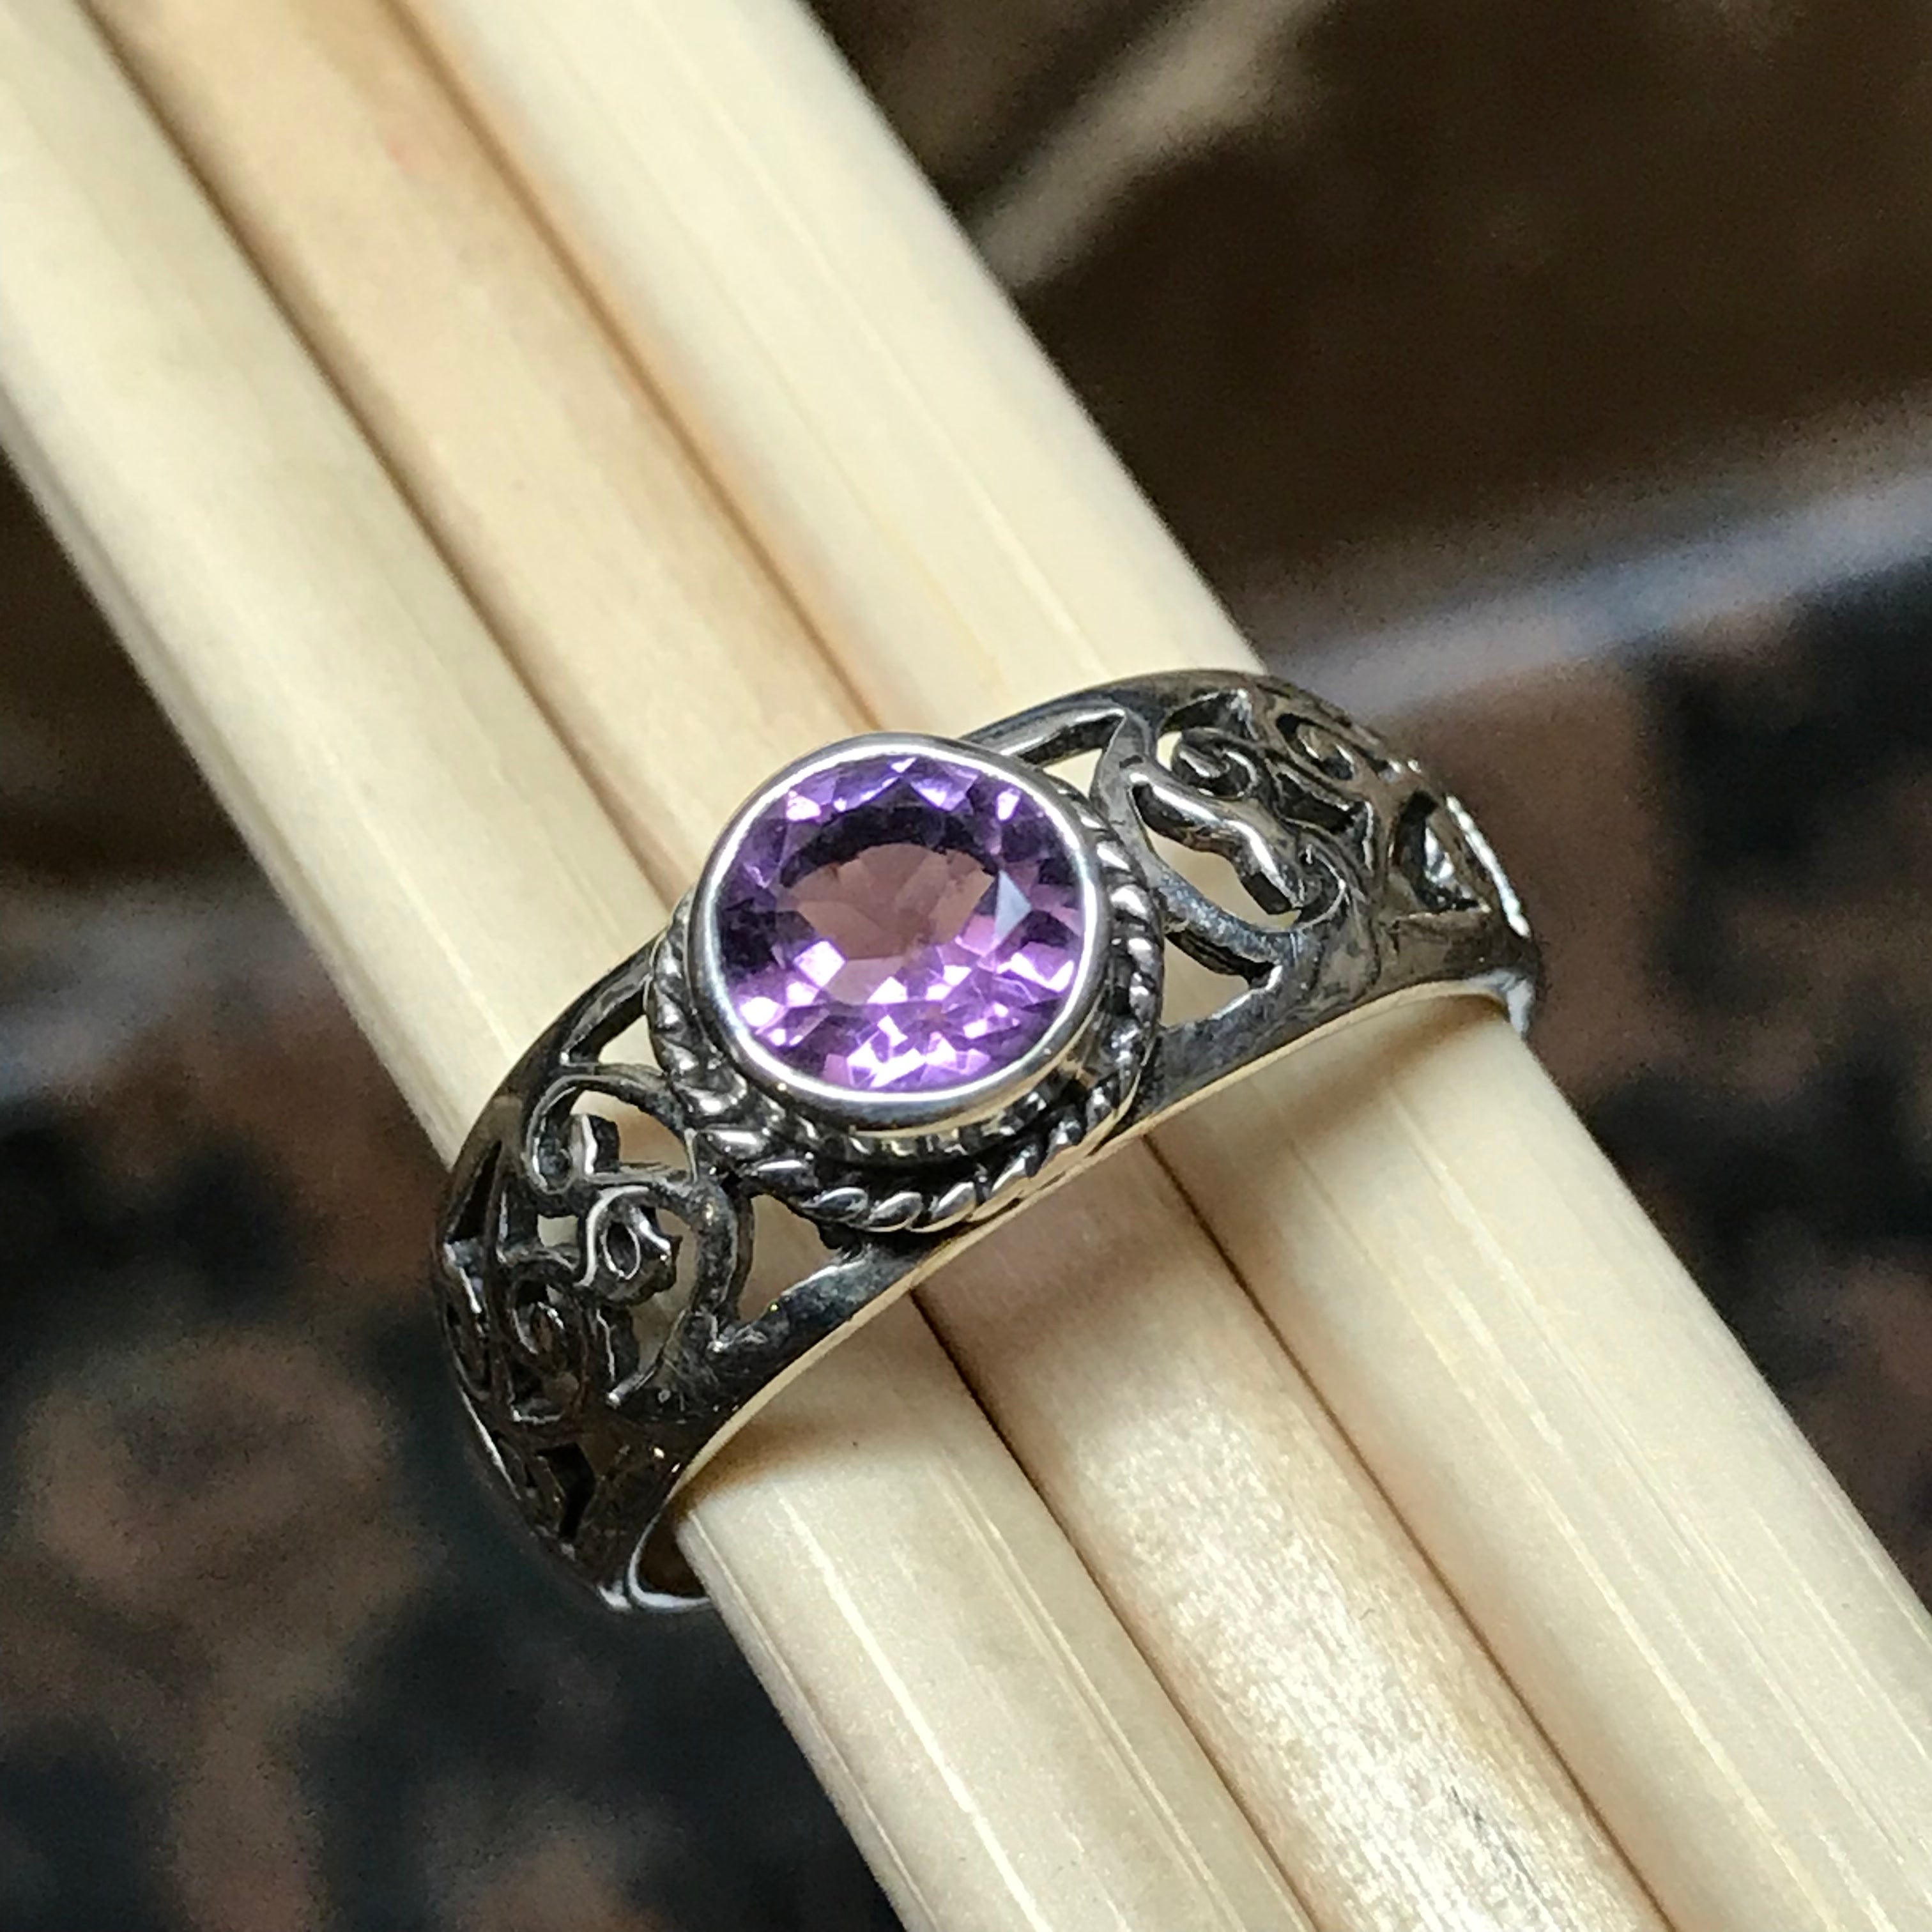 Natural 1ct Purple Amethyst 925 Solid Sterling Silver Engagement Ring Size 7, 8, 9 - Natural Rocks by Kala